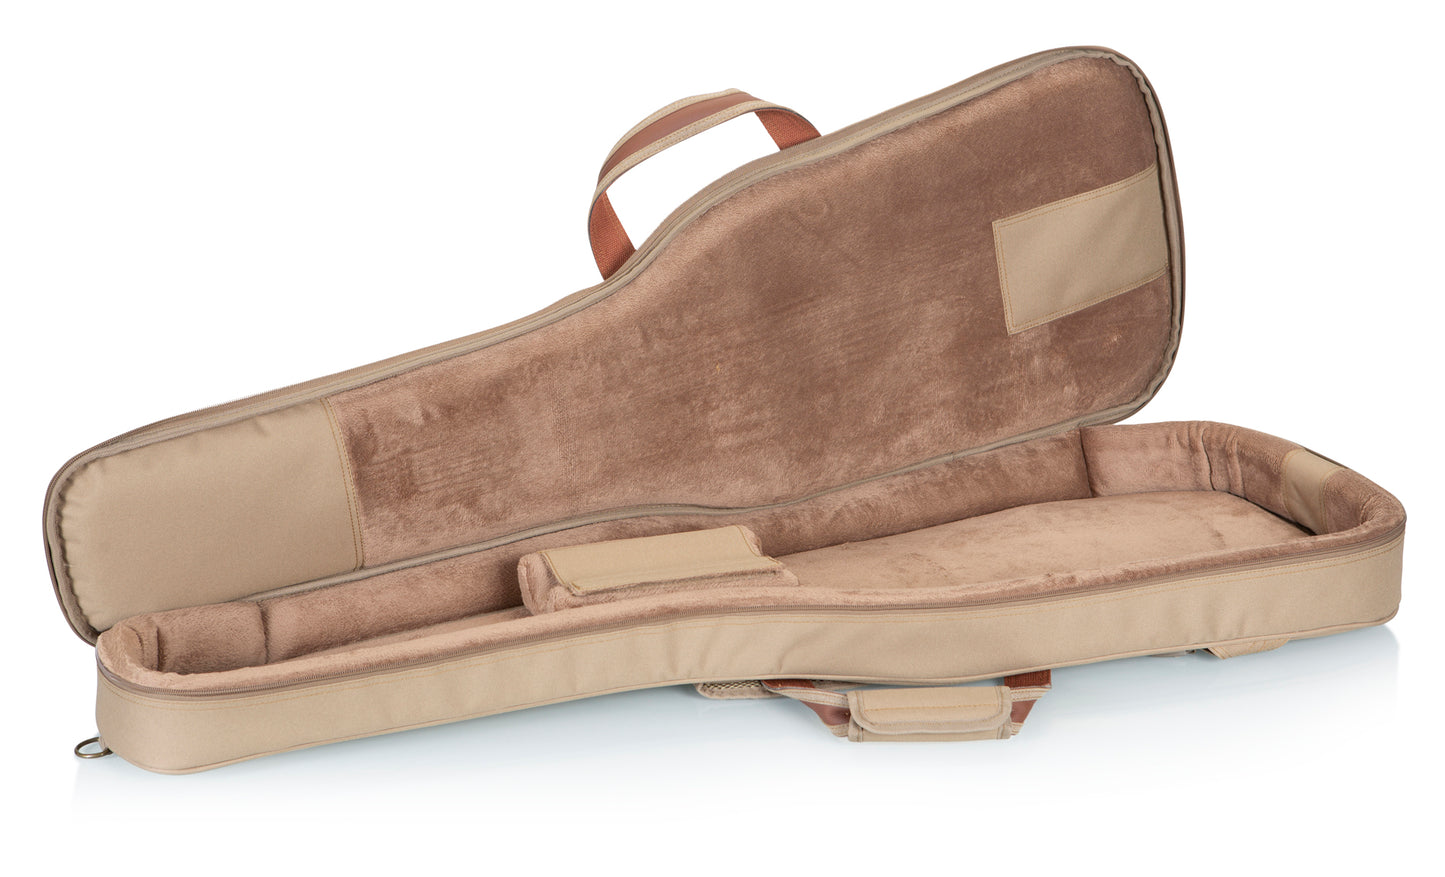 Levy's Deluxe Gig Bag for Electric Guitars - Tan